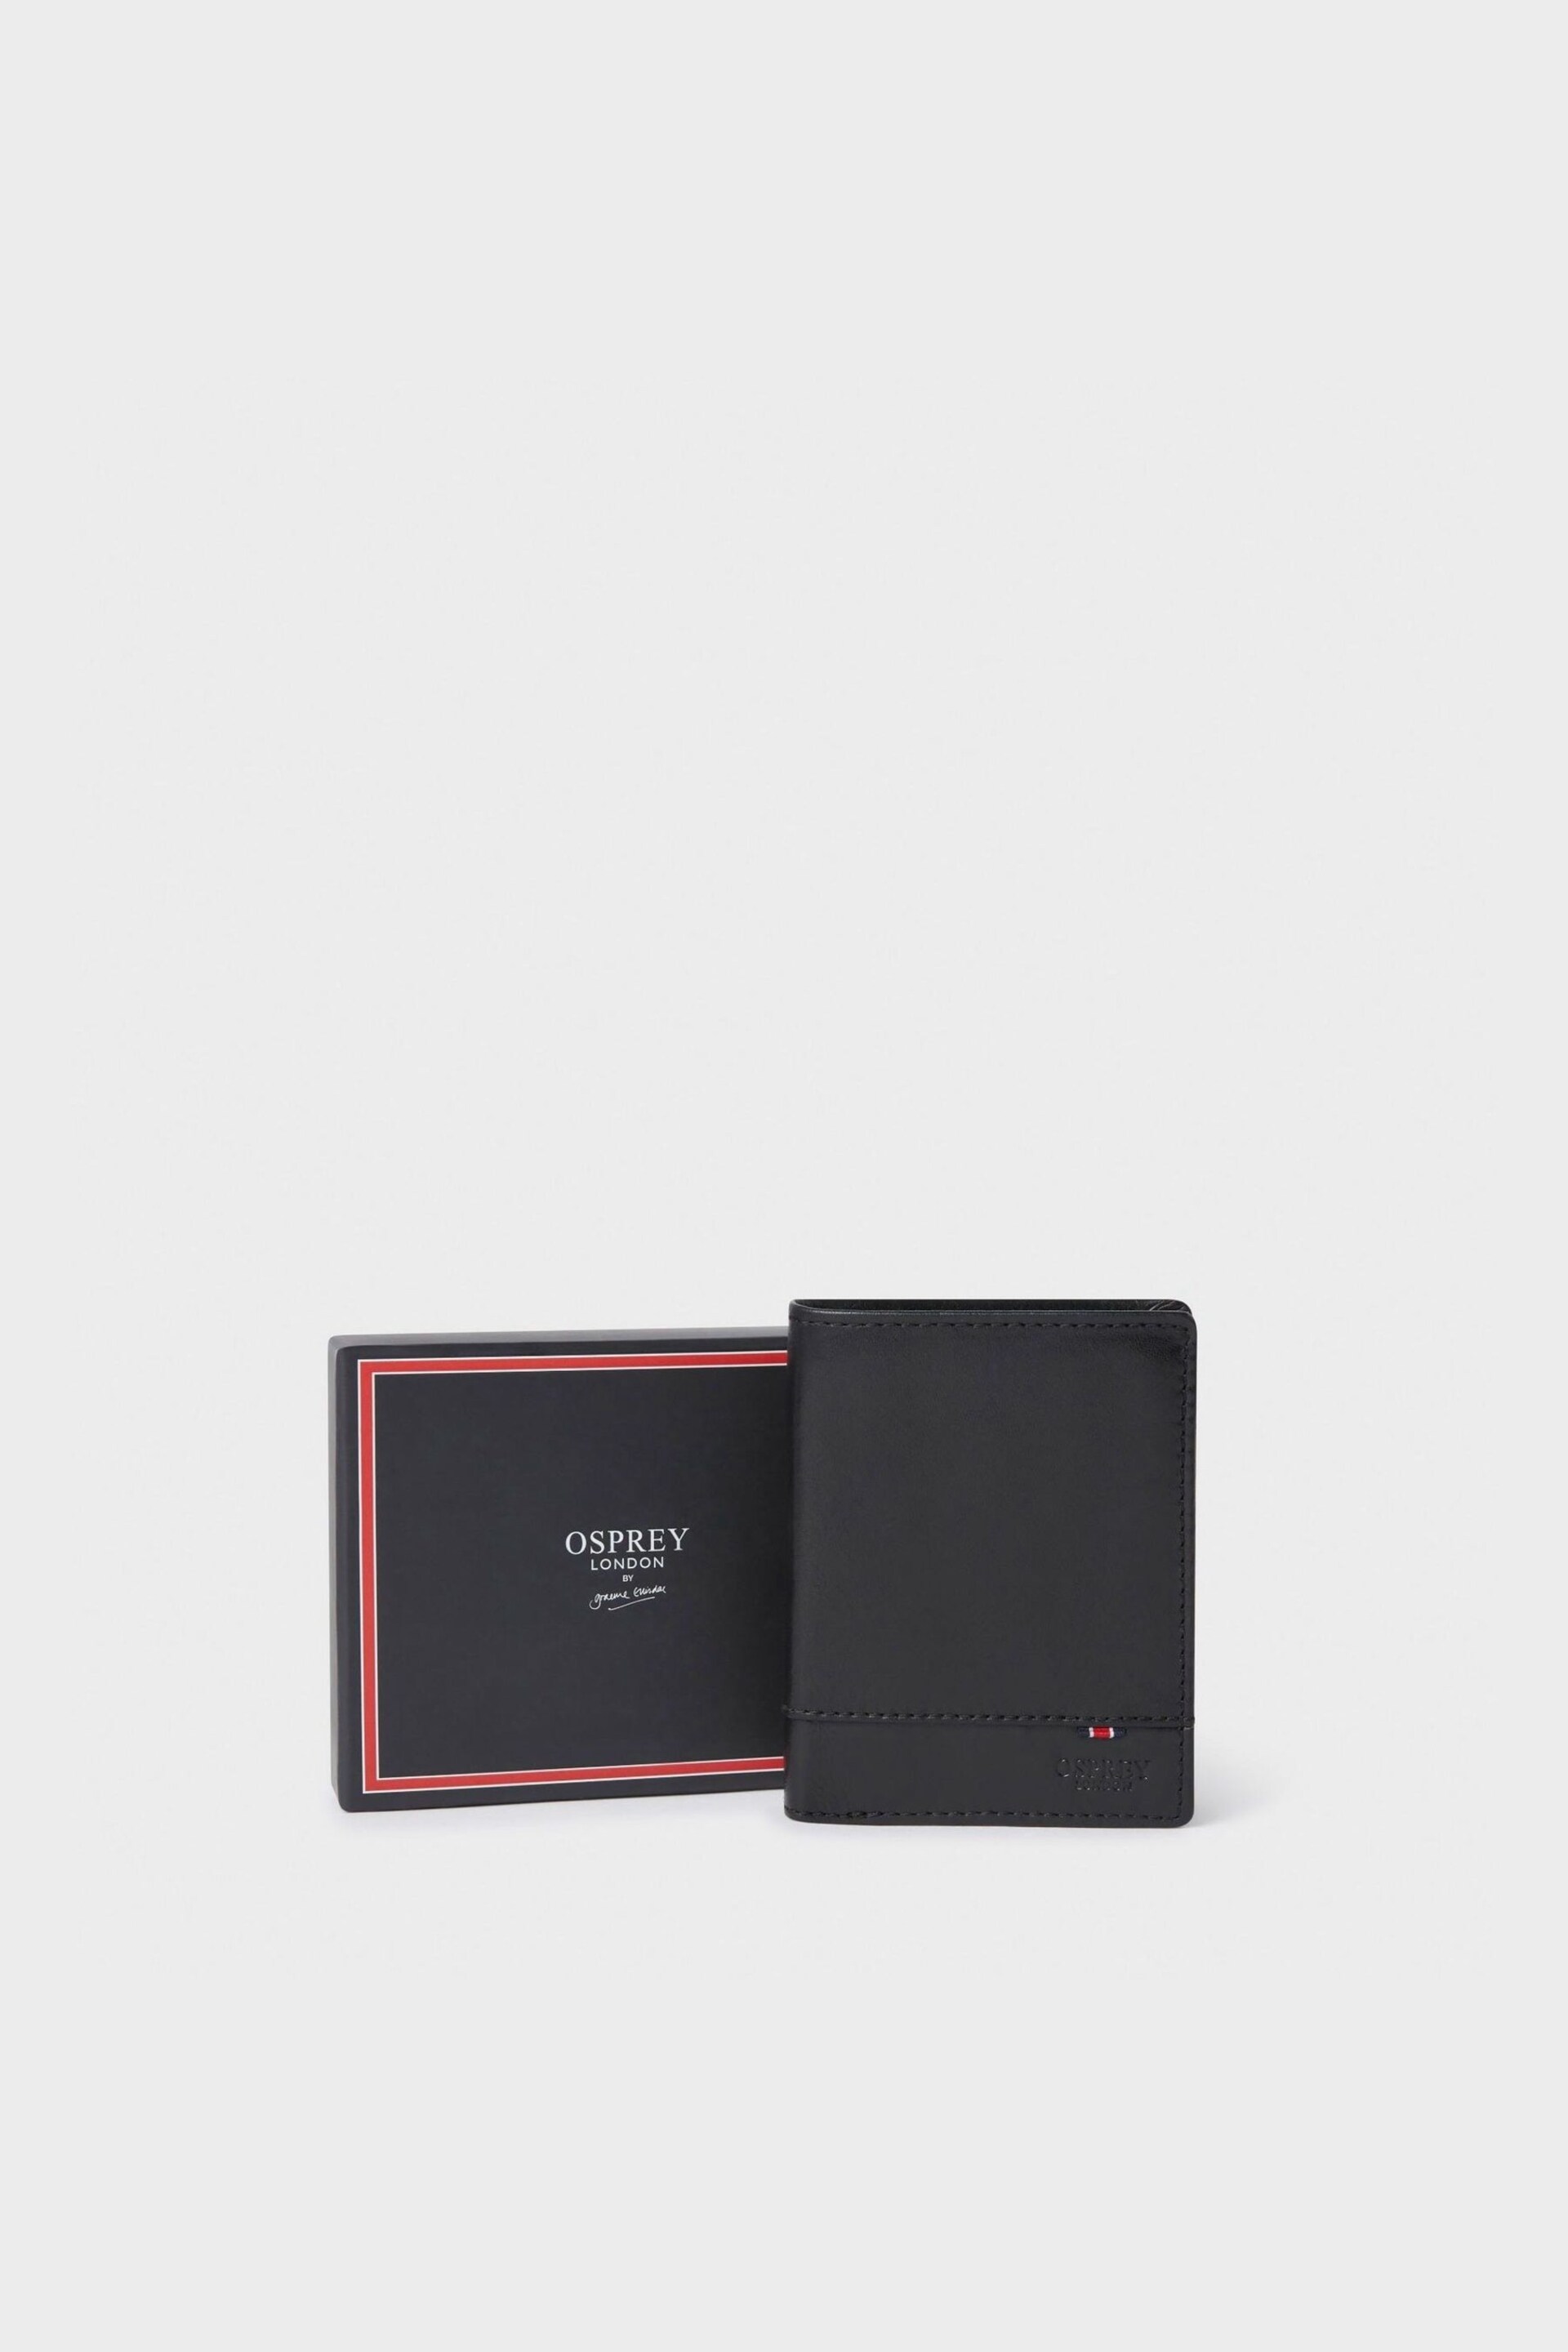 Osprey London The London Leather Wallet with Coin Pocket - Image 1 of 5